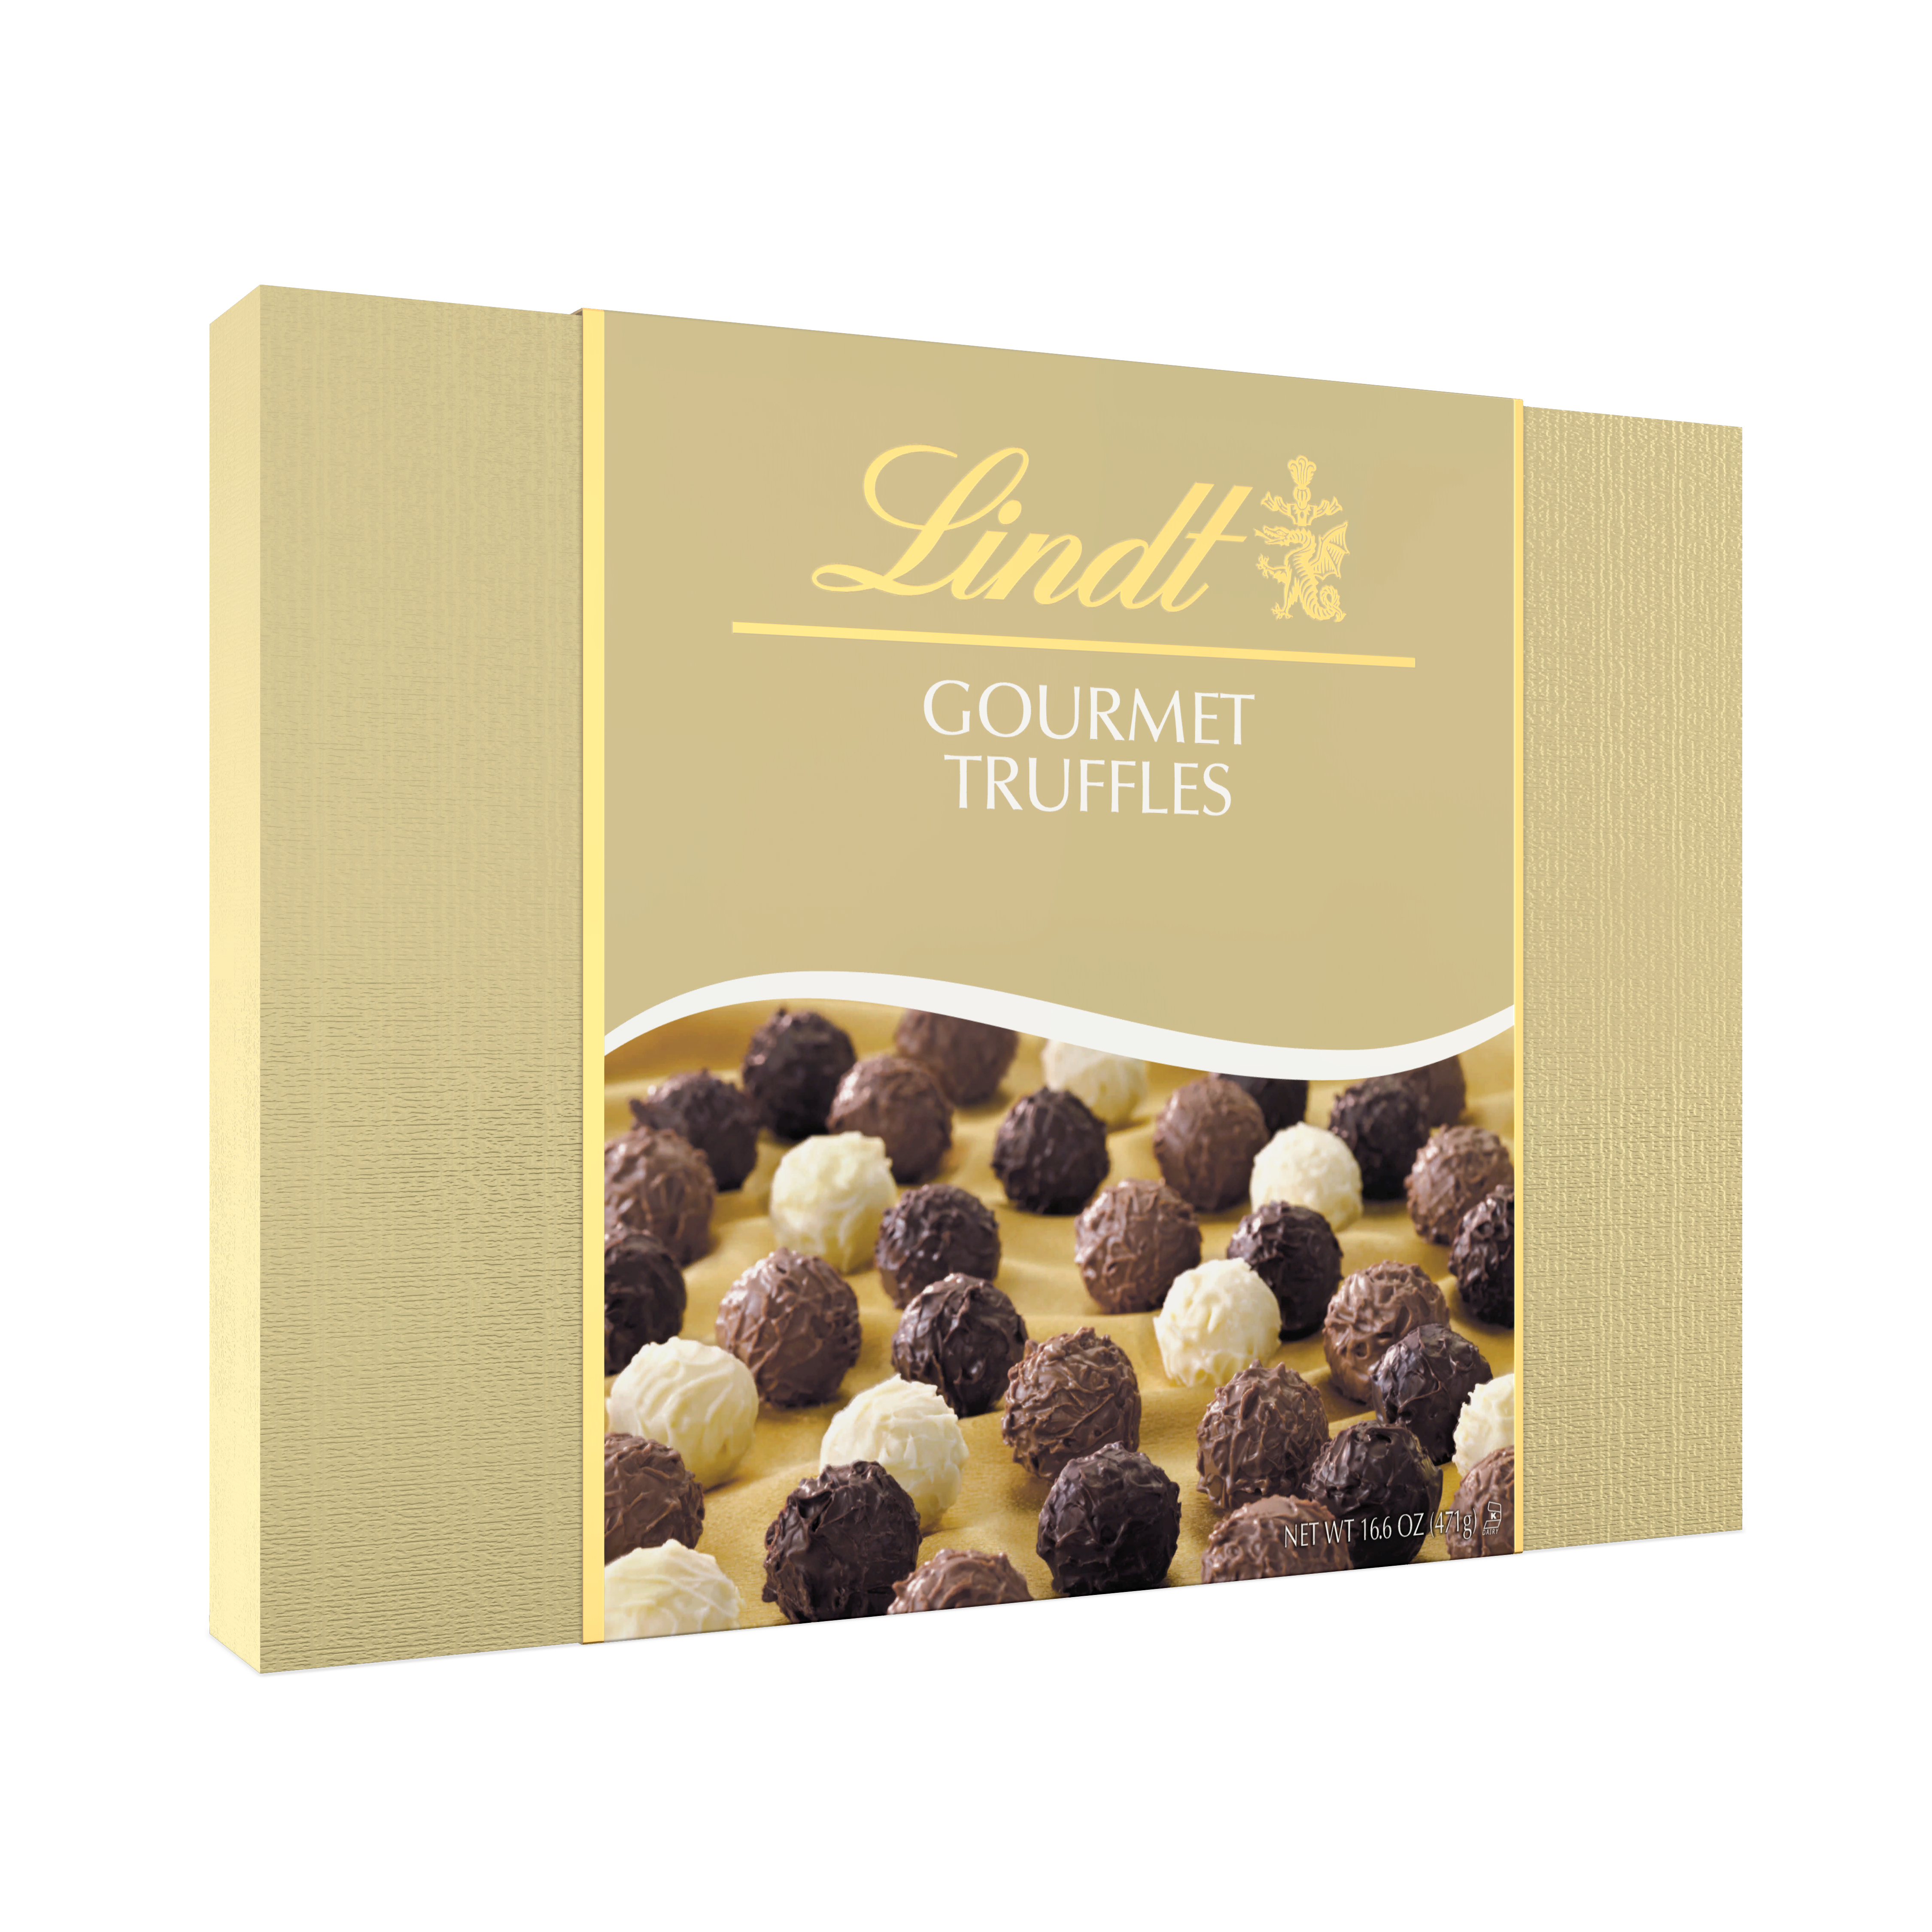 Lindt Chocolate Candy Gourmet Truffles Gift Box, 16.6 oz - image 1 of 1